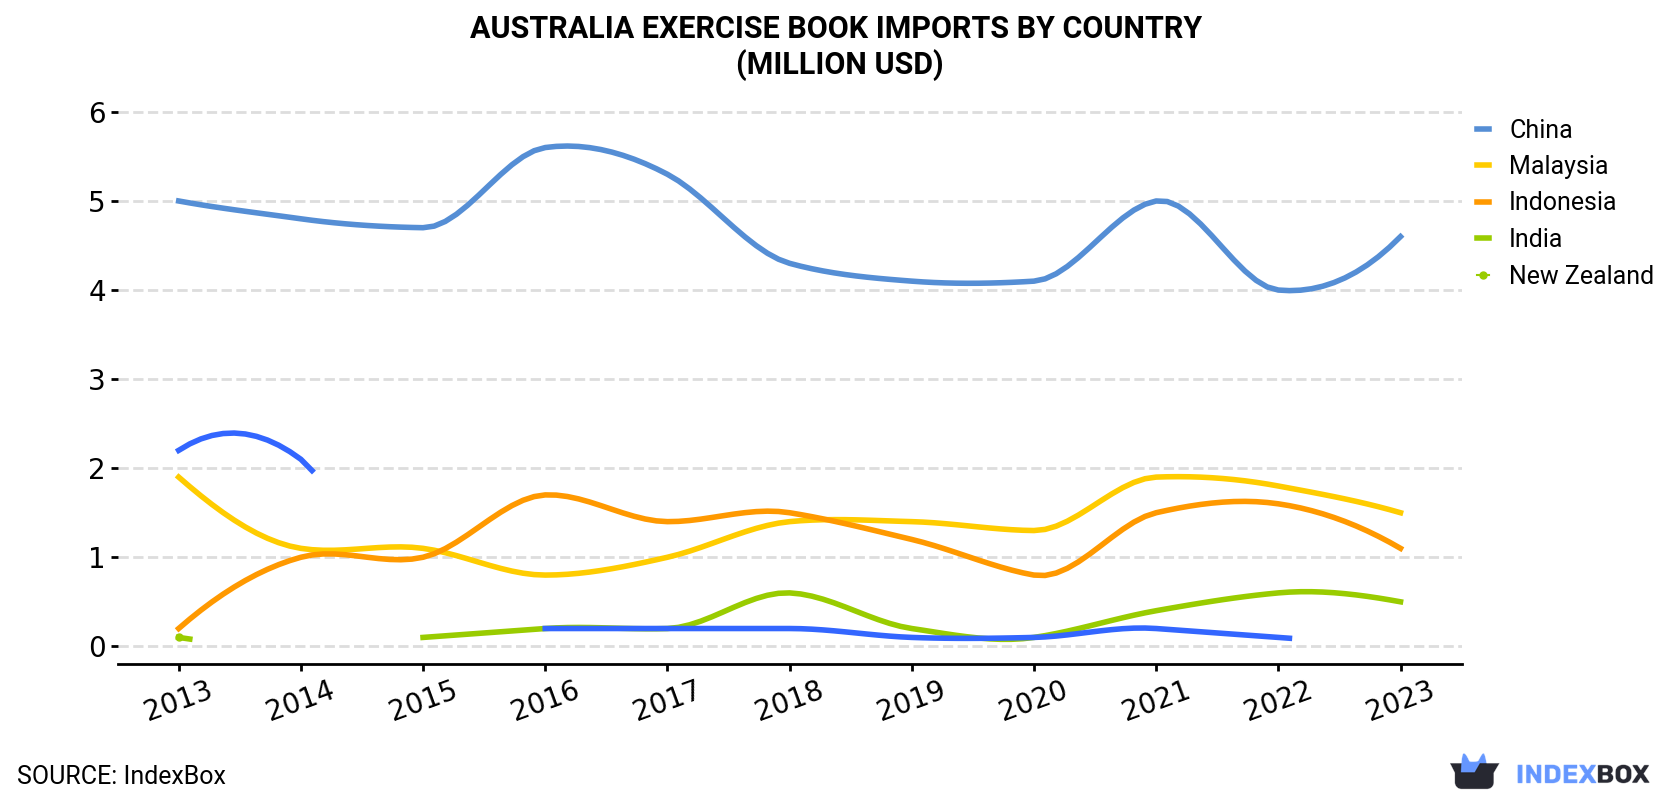 Australia Exercise Book Imports By Country (Million USD)